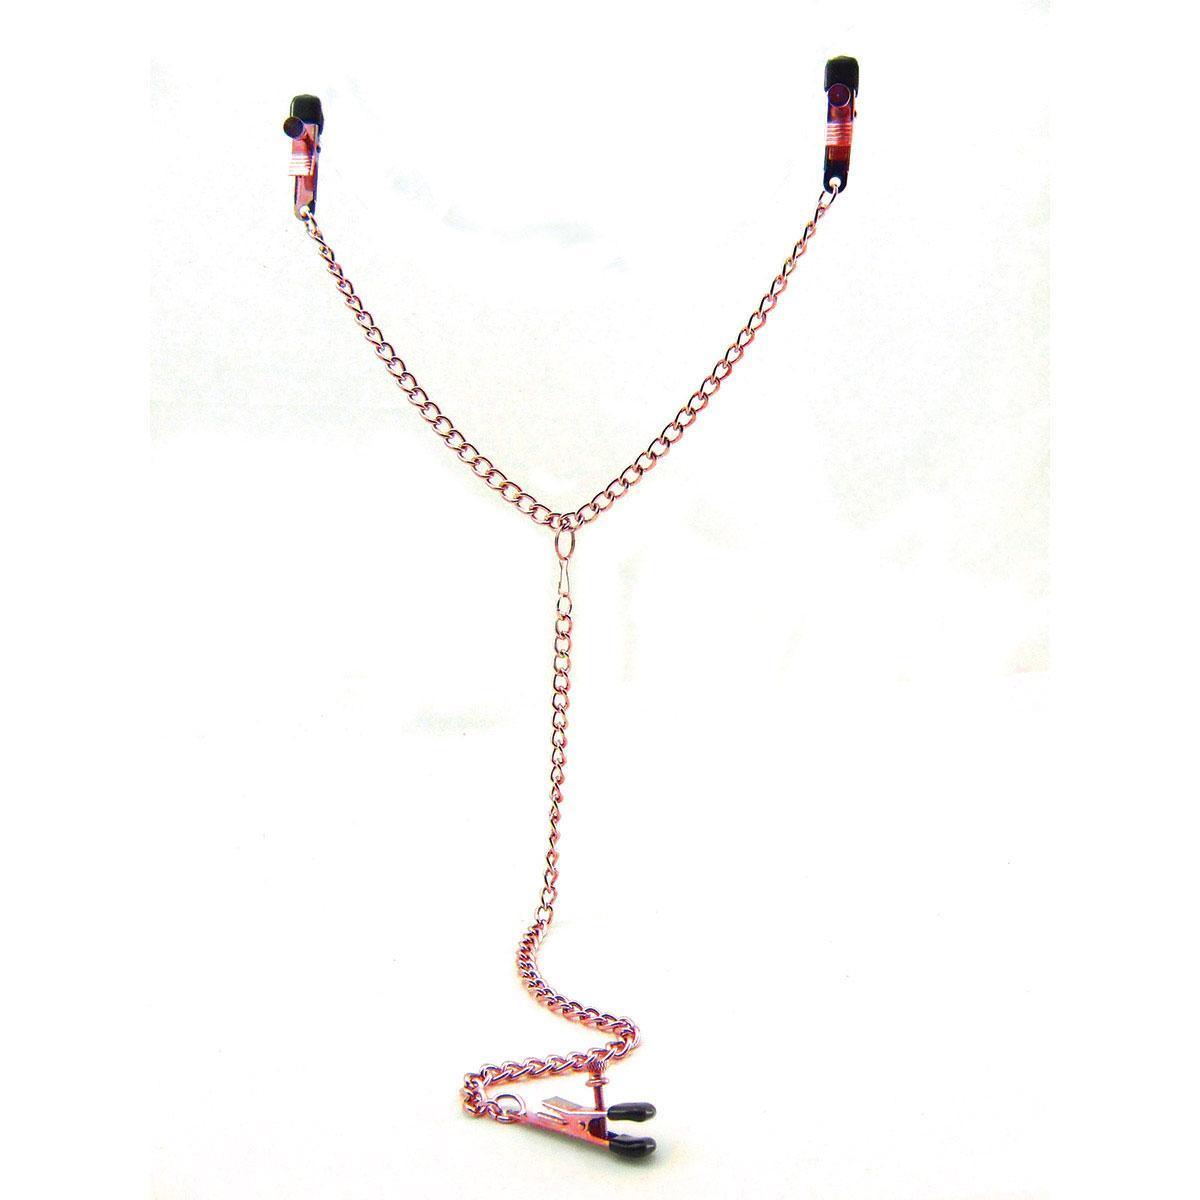 Sex Kitten Y-Style Adjustable Clamps - shop enby